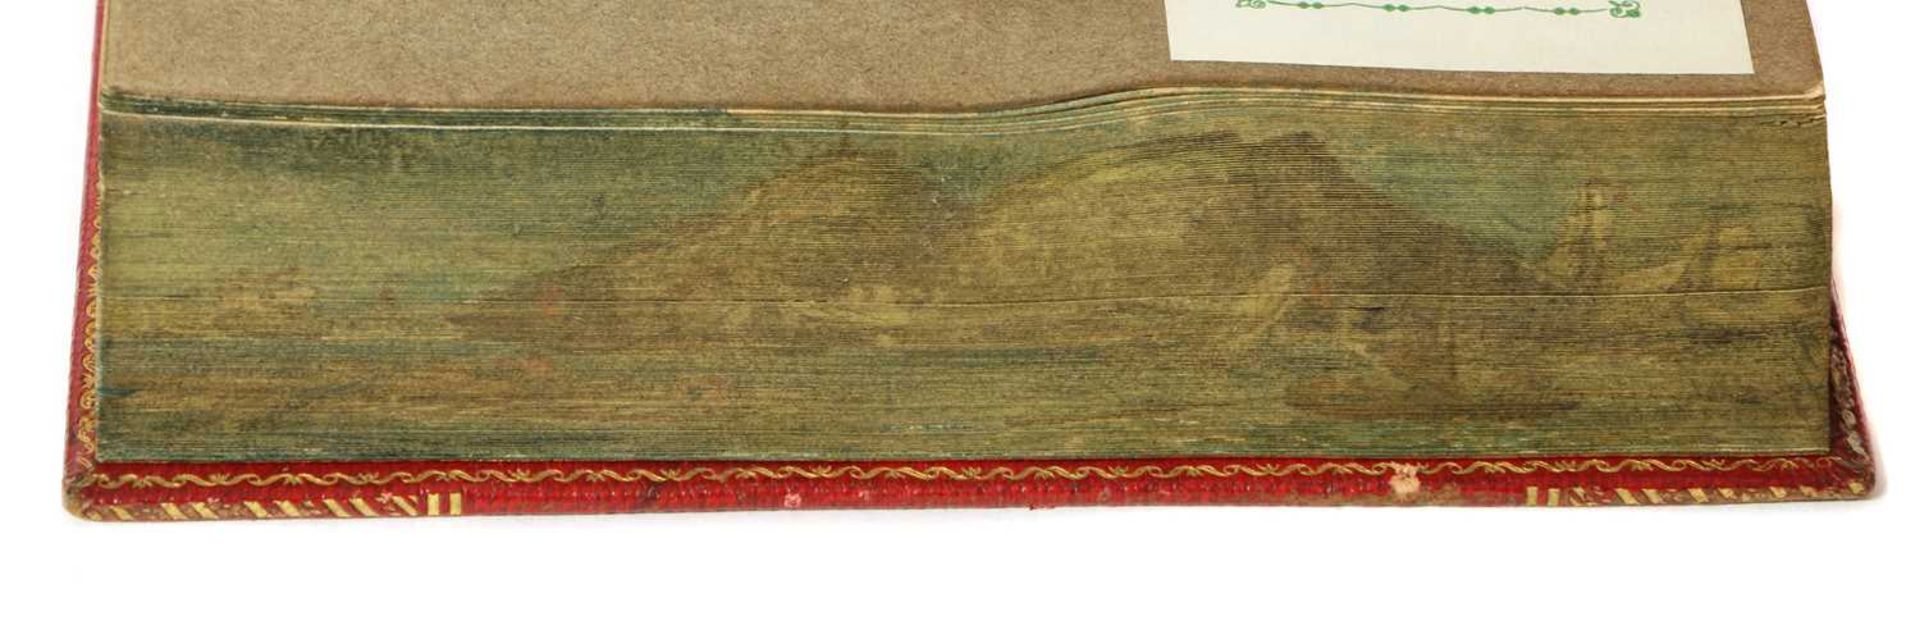 FORE-EDGE PAINTING: - Image 3 of 3